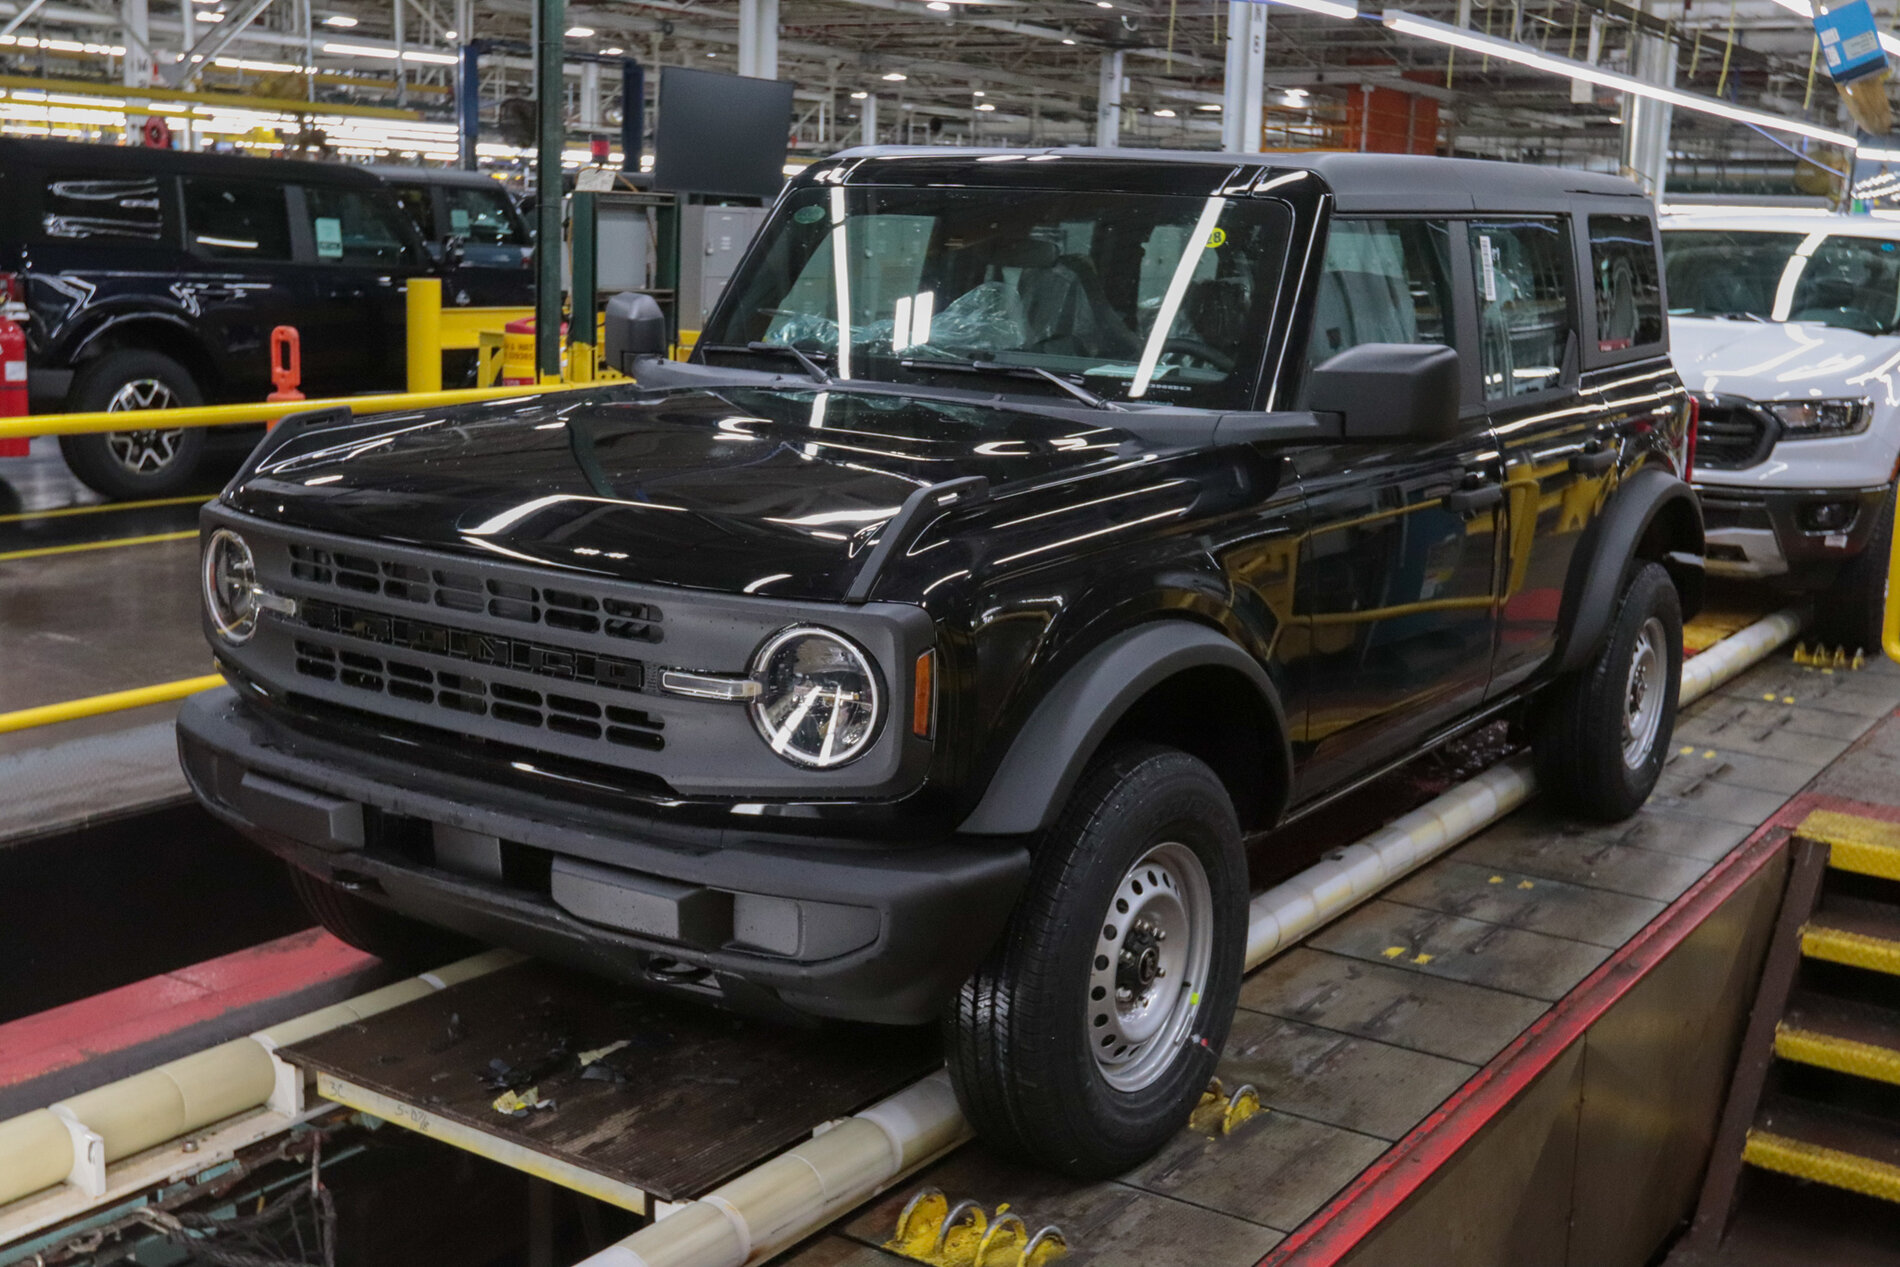 Ford Bronco Post Your Bronco Production Line Pics! (From Ford Emails Starting Today) image (1)